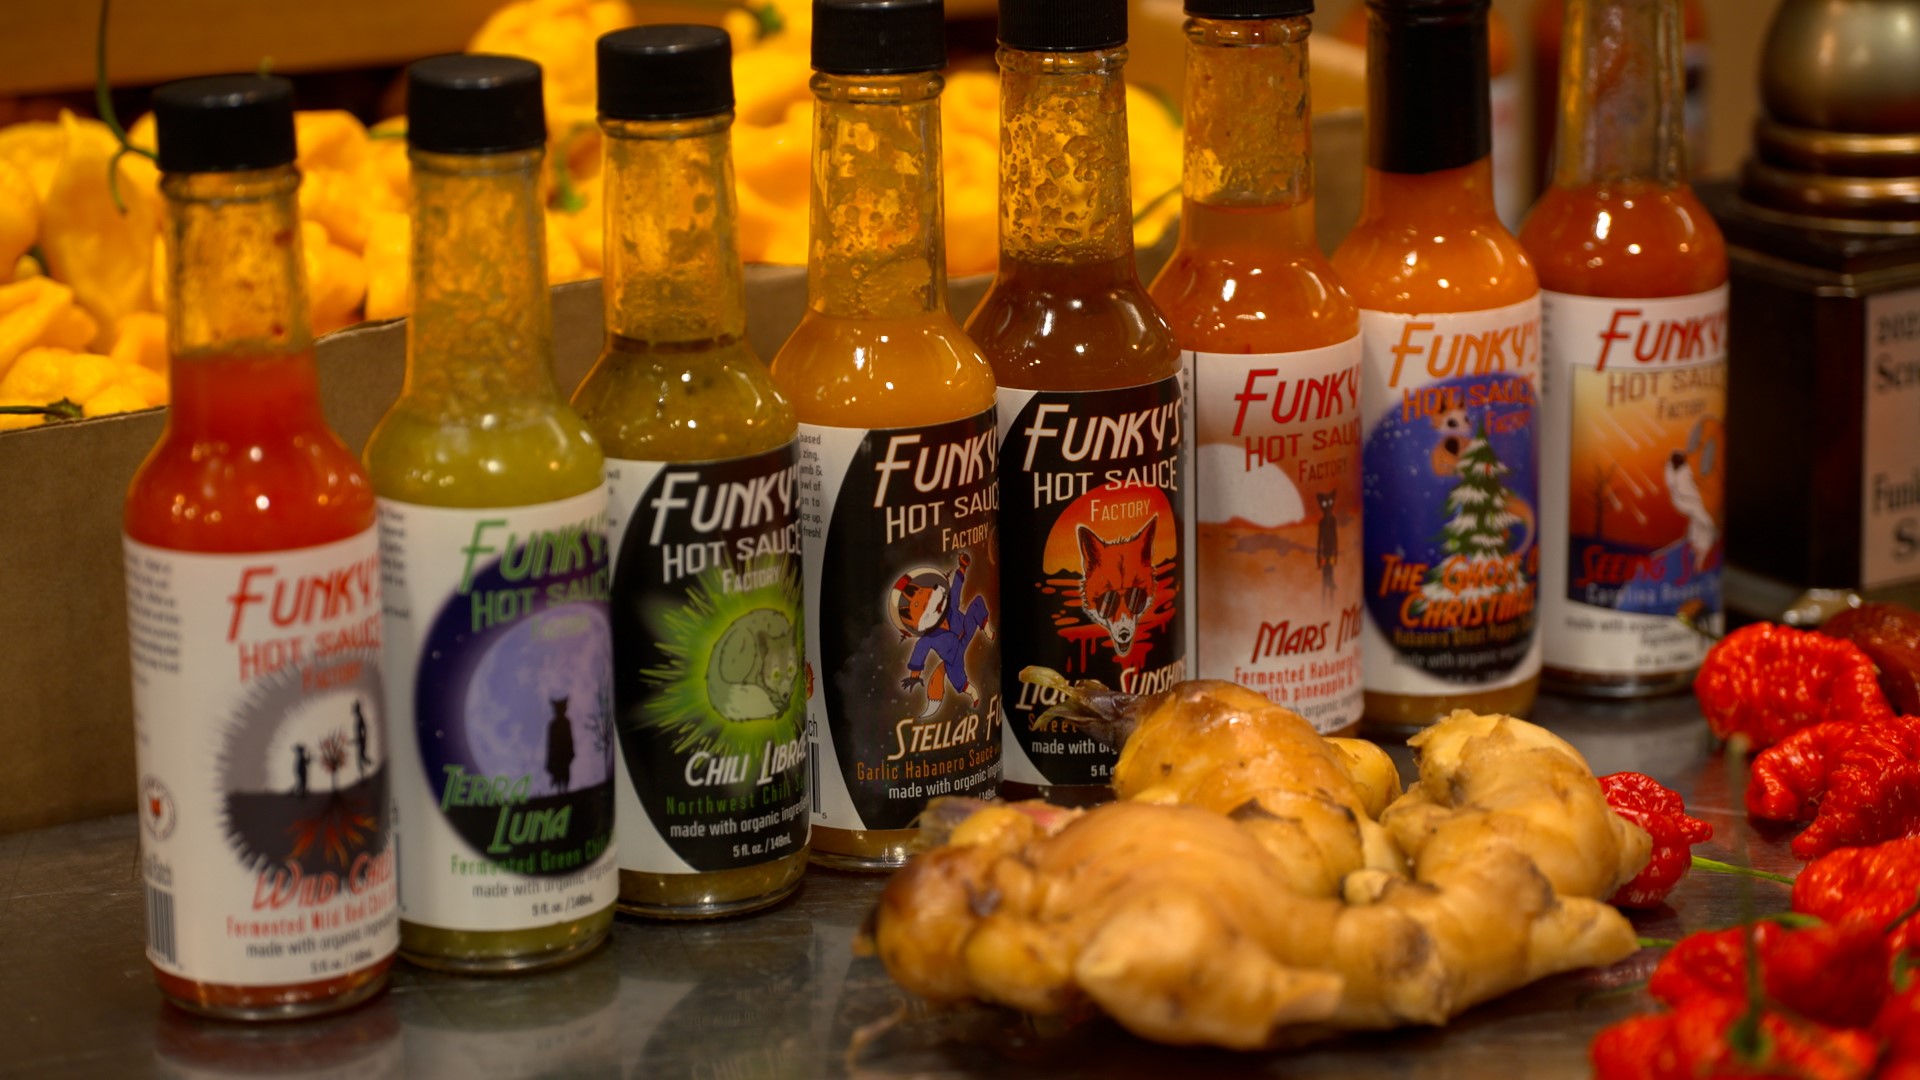 These sauces are delicious, hot, and flavorful. #k5evening